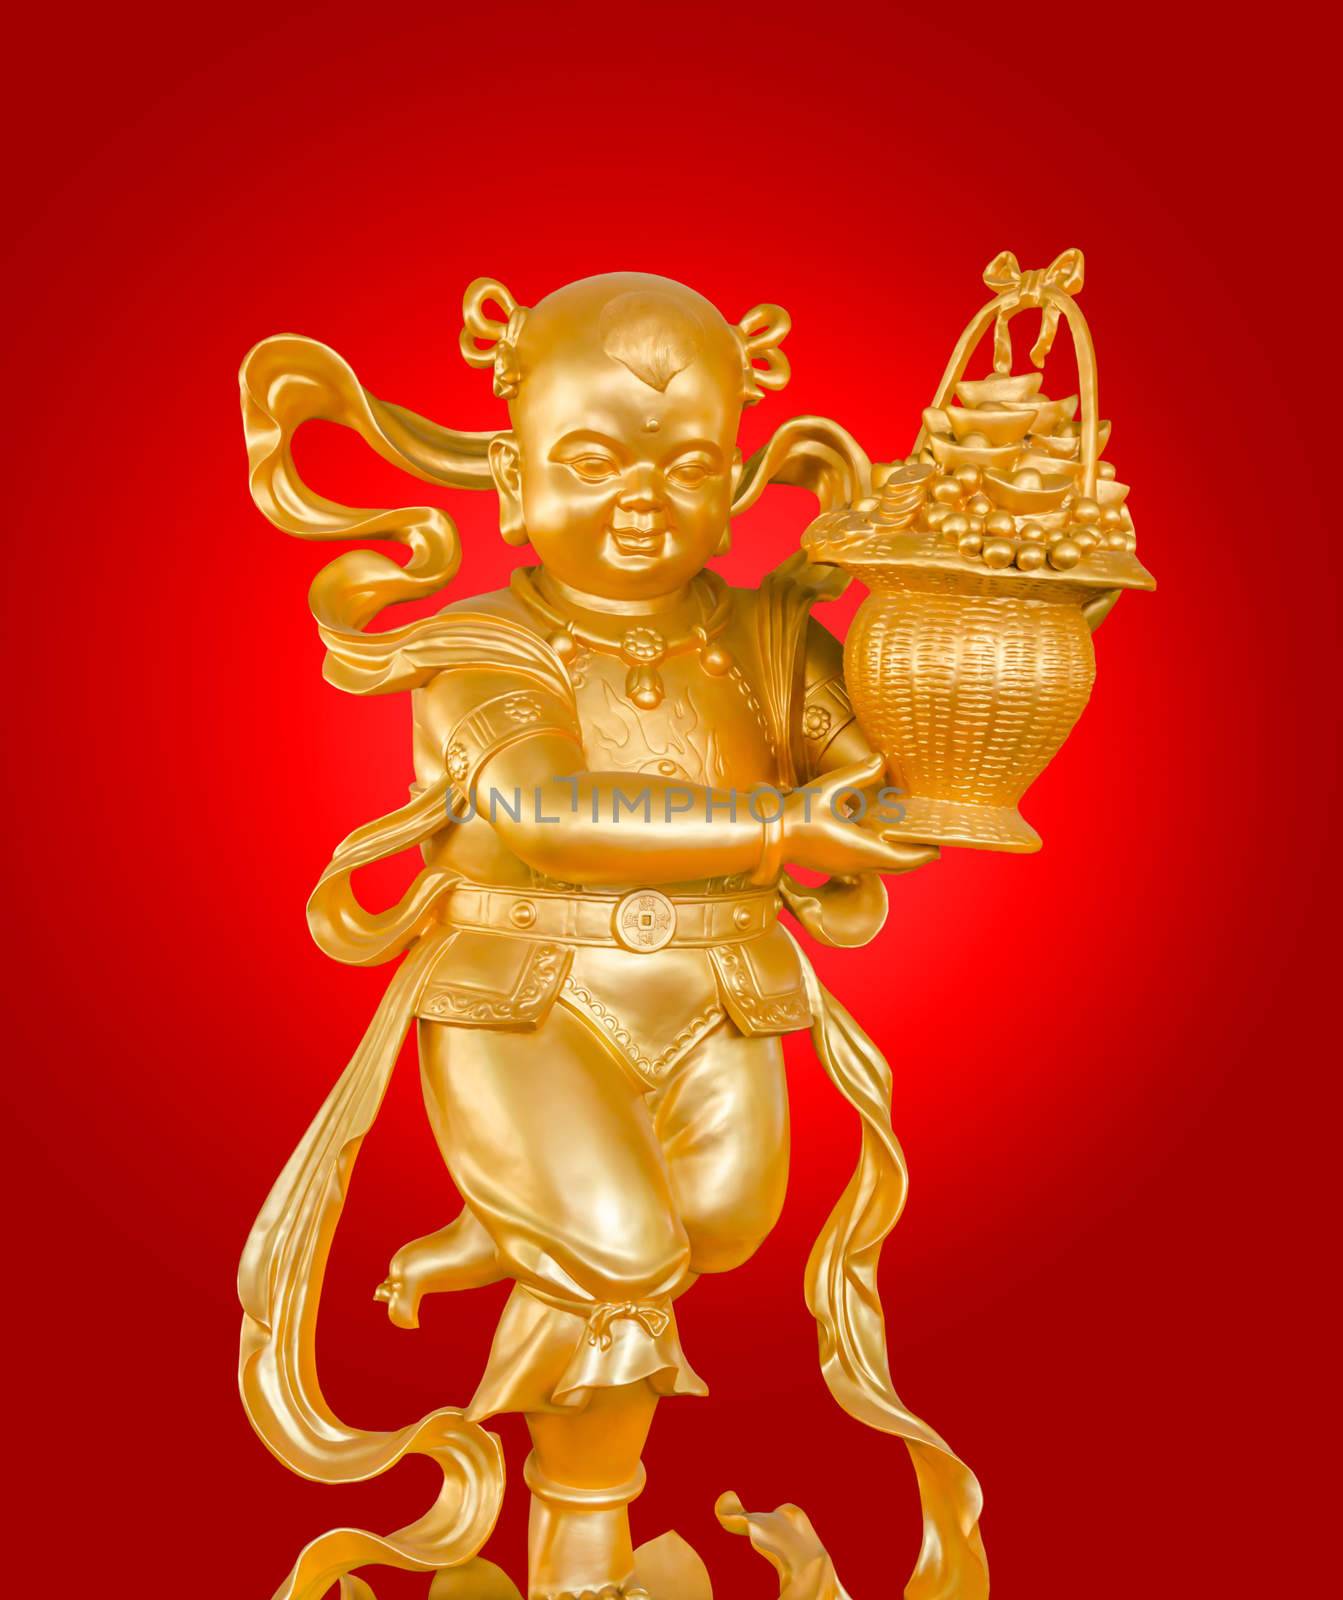 Gold God of Wealth or prosperity (Cai Shen) statue on red background.